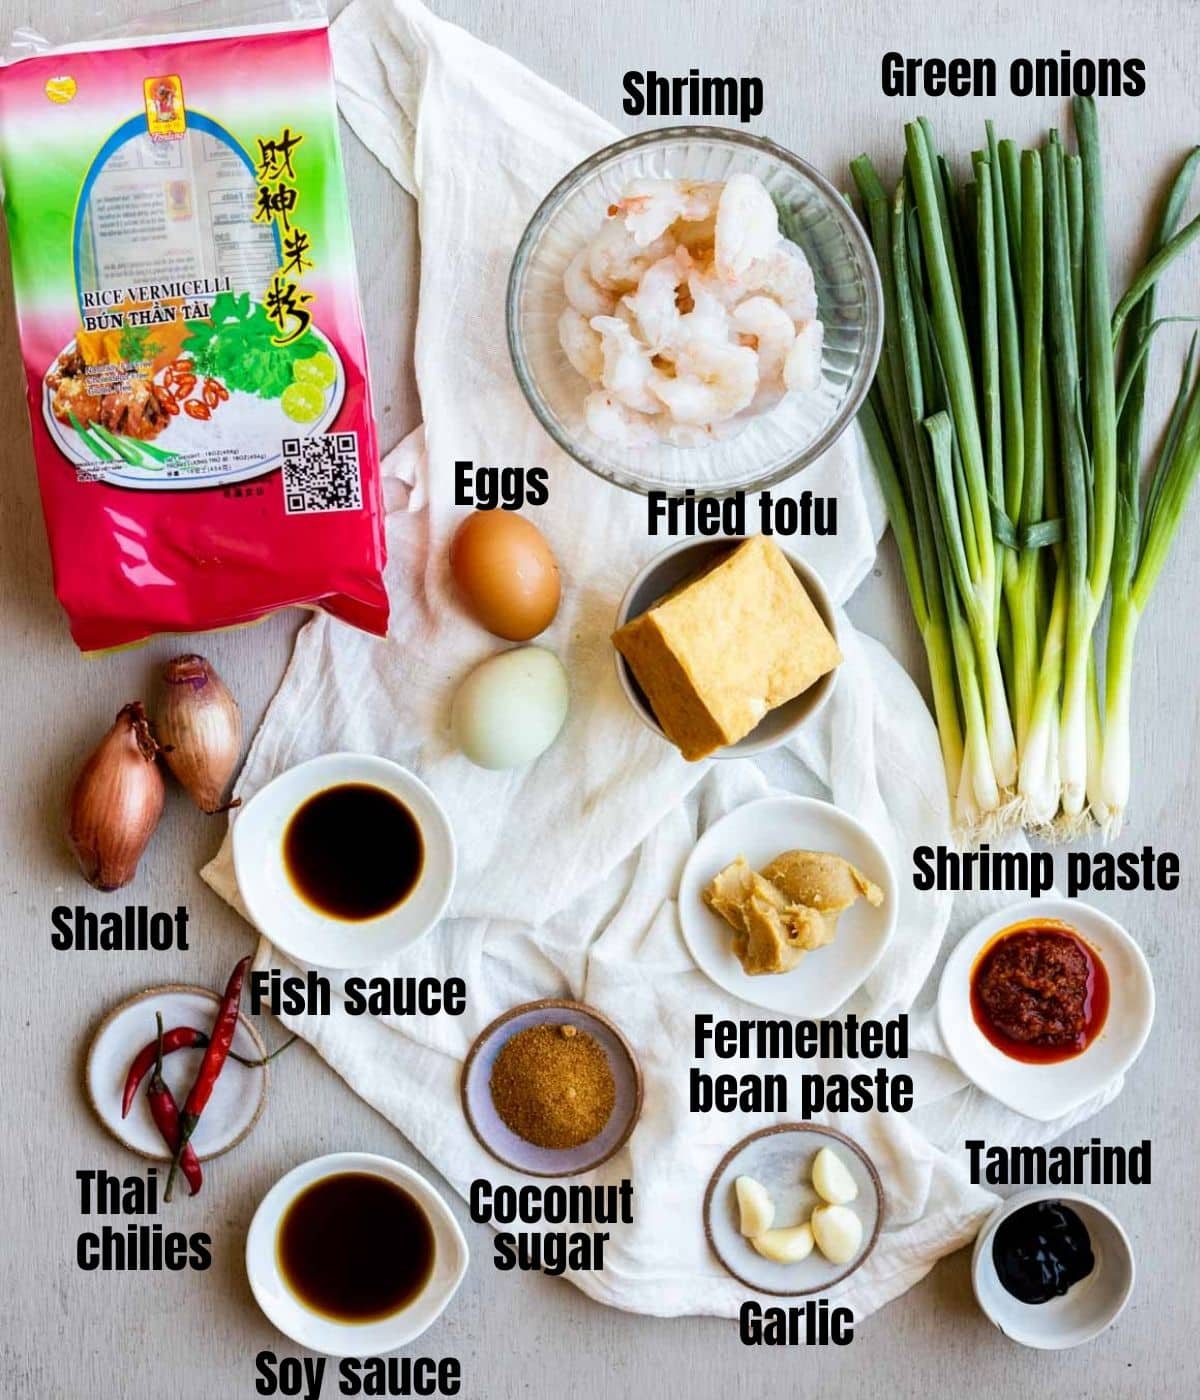 Ingredients to make mee siam arranged individually and labelled.